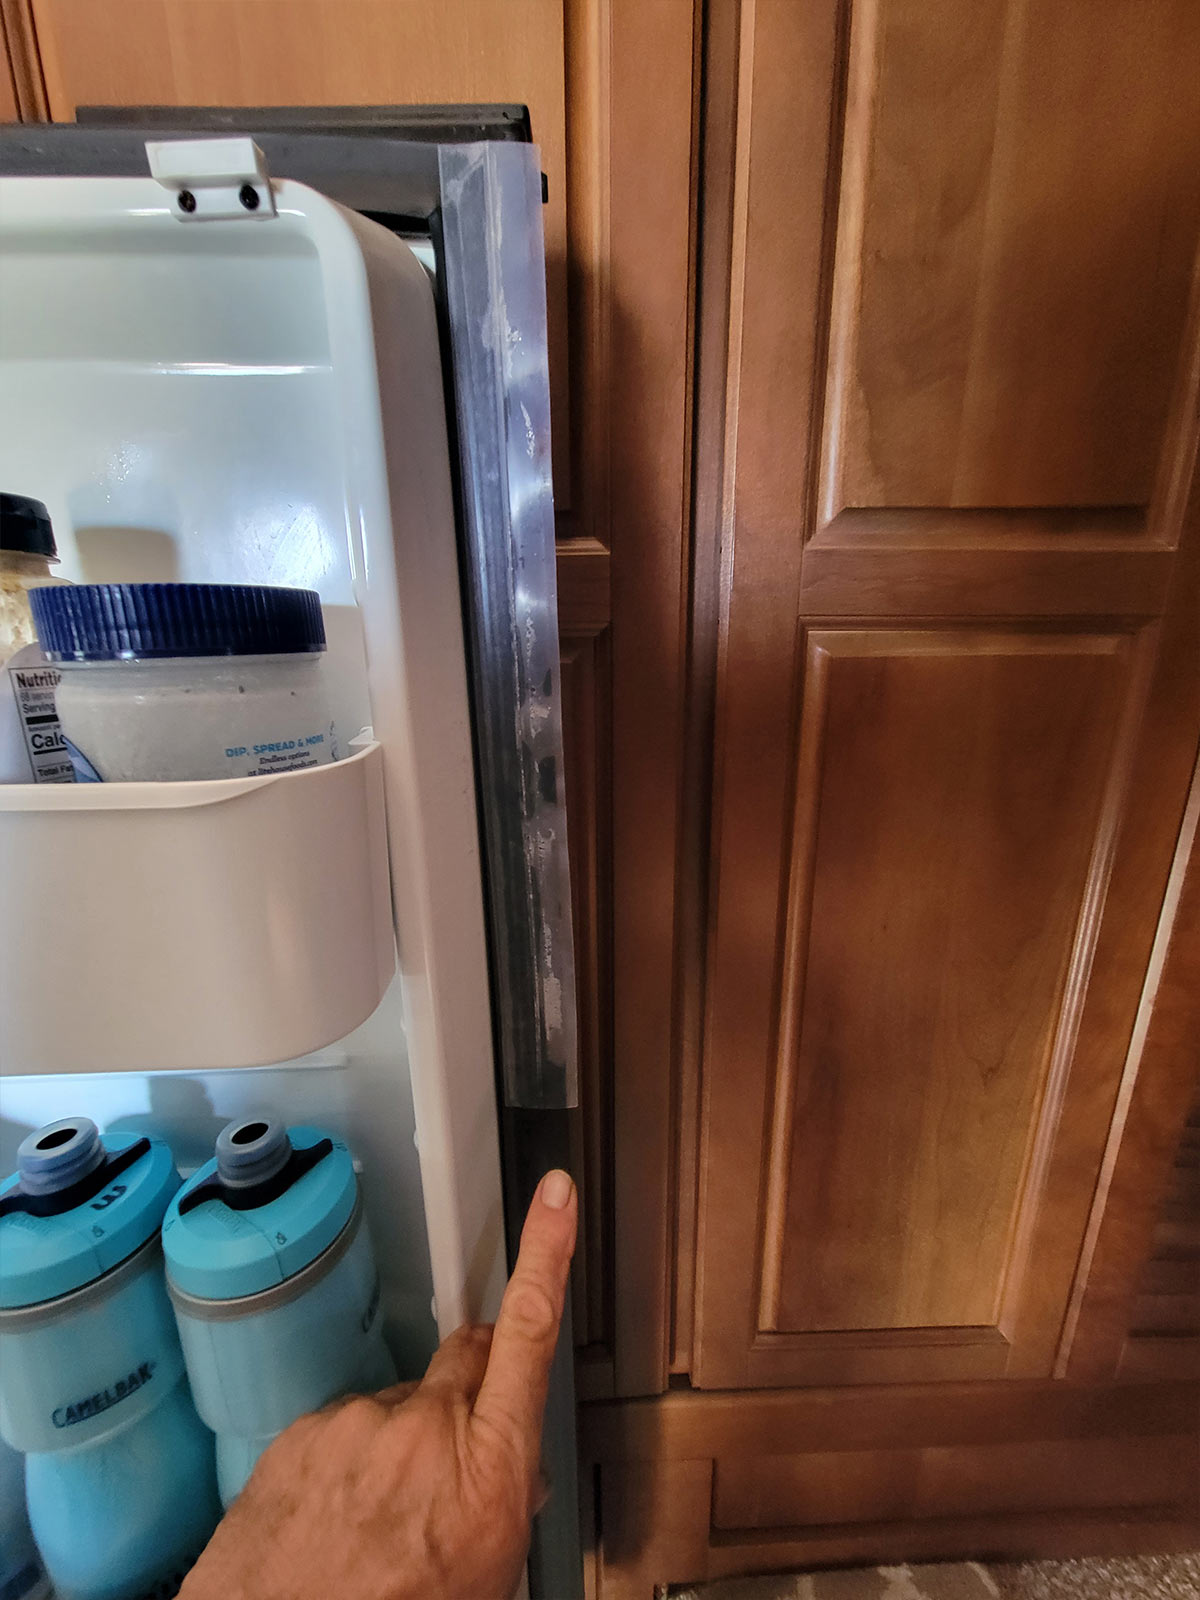 a finger gestures to another area on the refrigerator that required gasket repair with a larger section of silicone seal tape